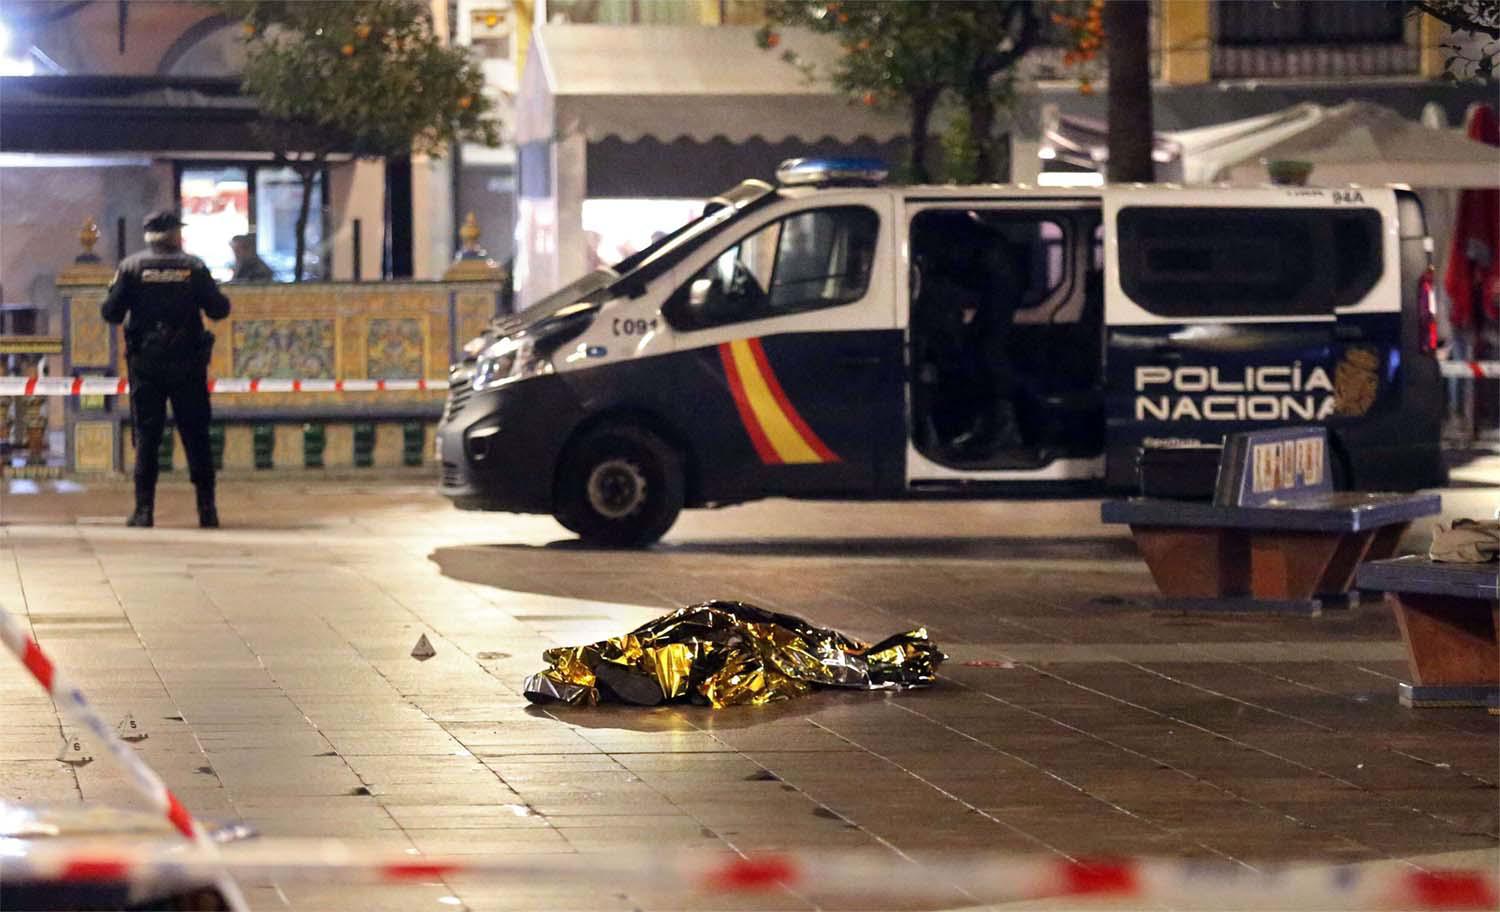 The body of a dead man lays on the ground as police secure the area in Algeciras, southern Spain